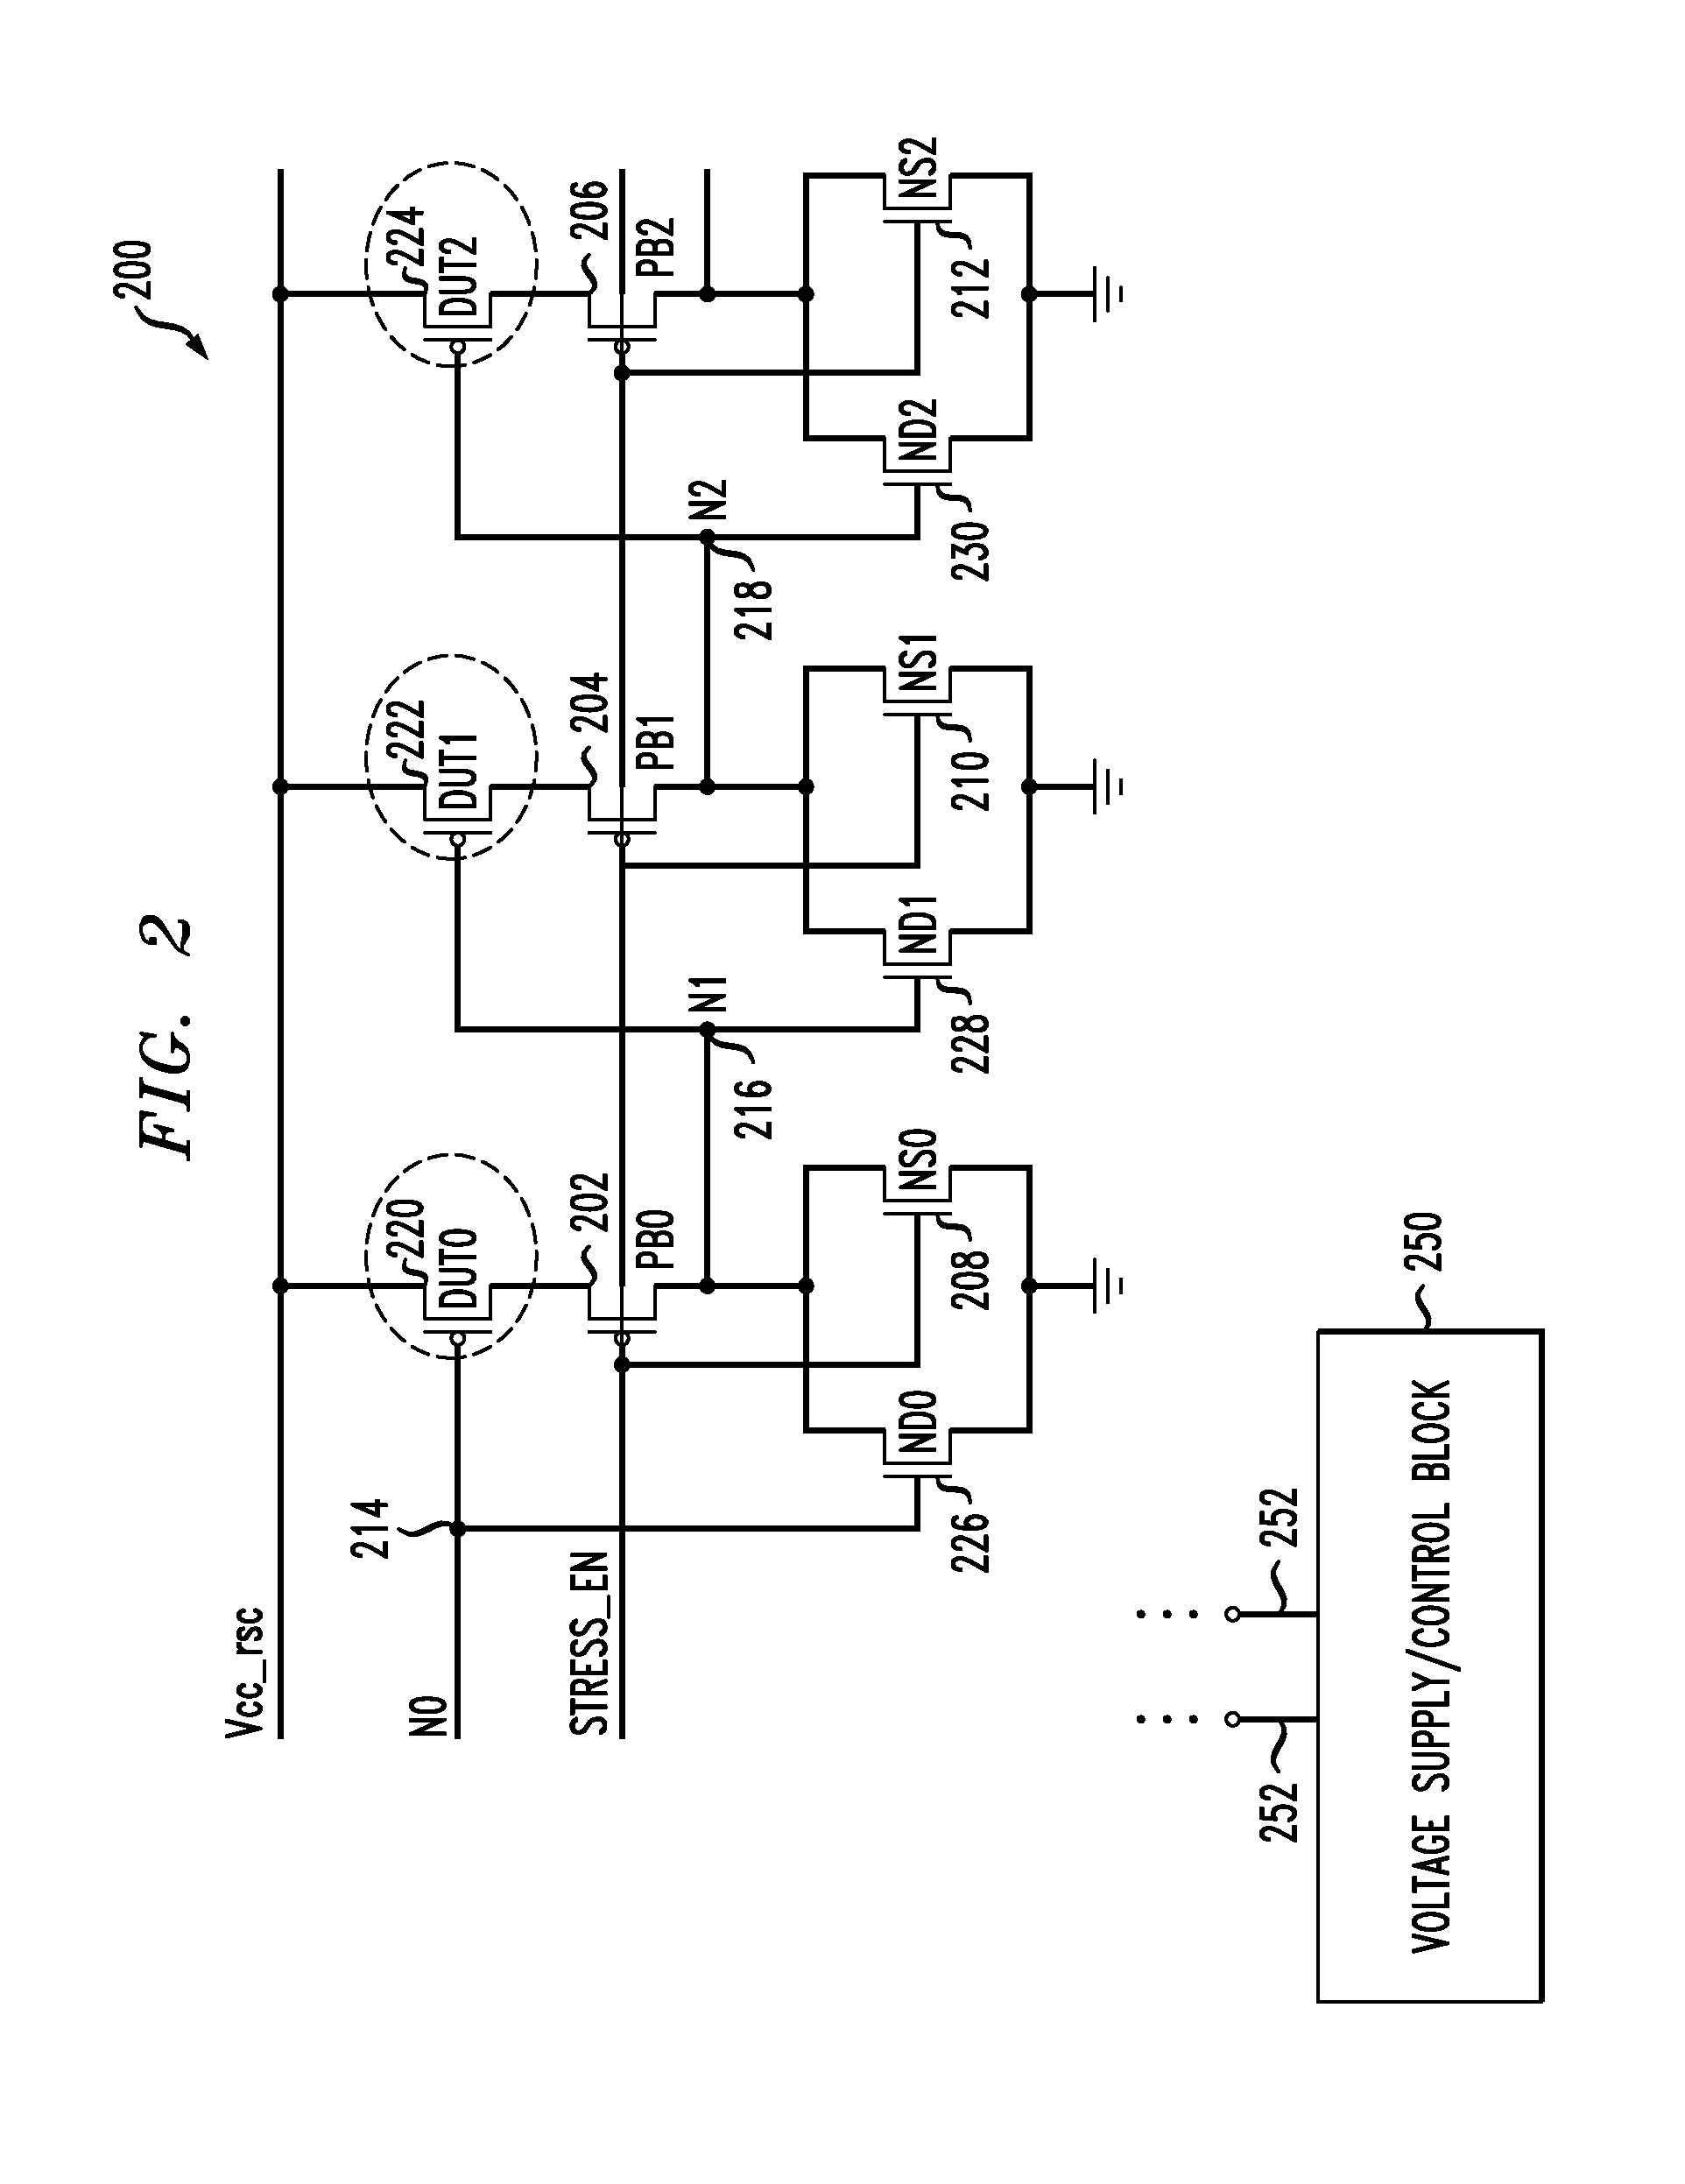 Circuits and design structures for monitoring NBTI (negative bias temperature instability) effect and/or PBTI (positive bias temperature instability) effect